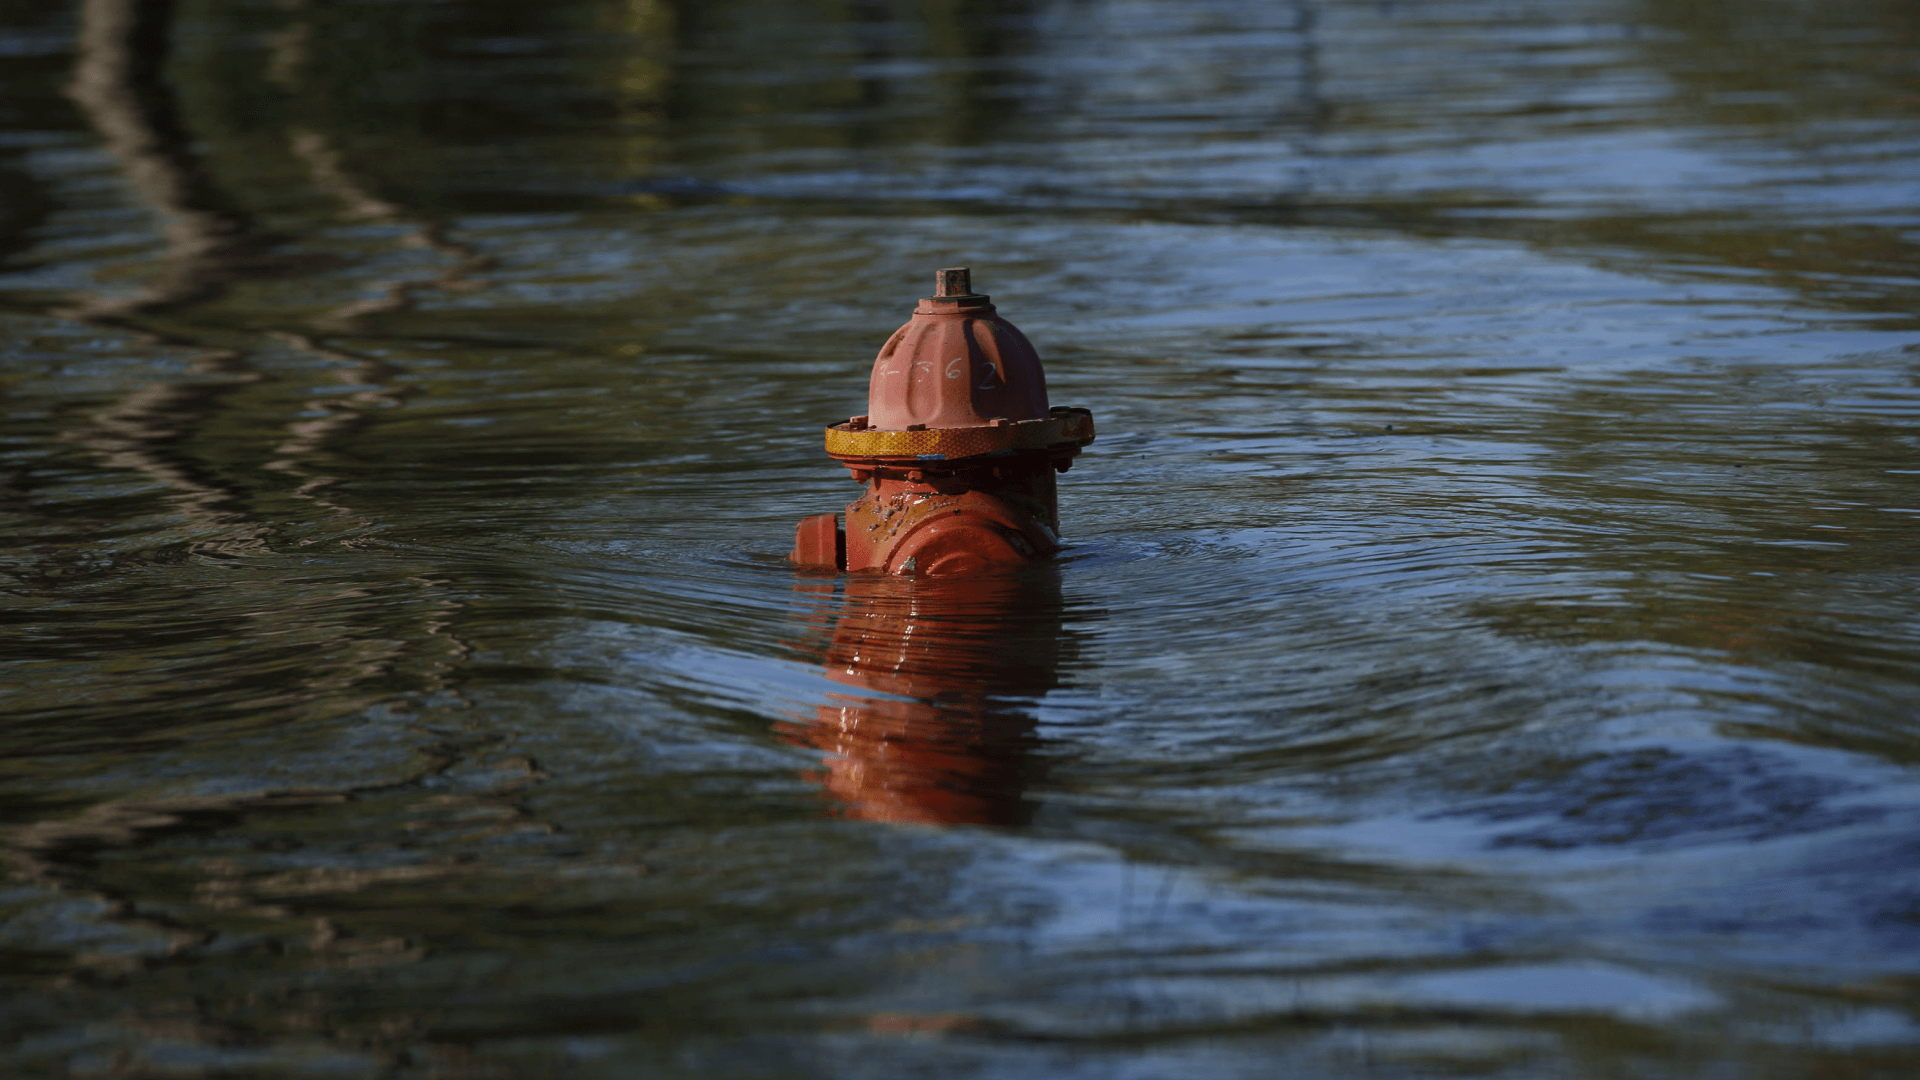 A fire hydrant submerged in floodwaters after Hurricane Delta made landfall in Louisiana.